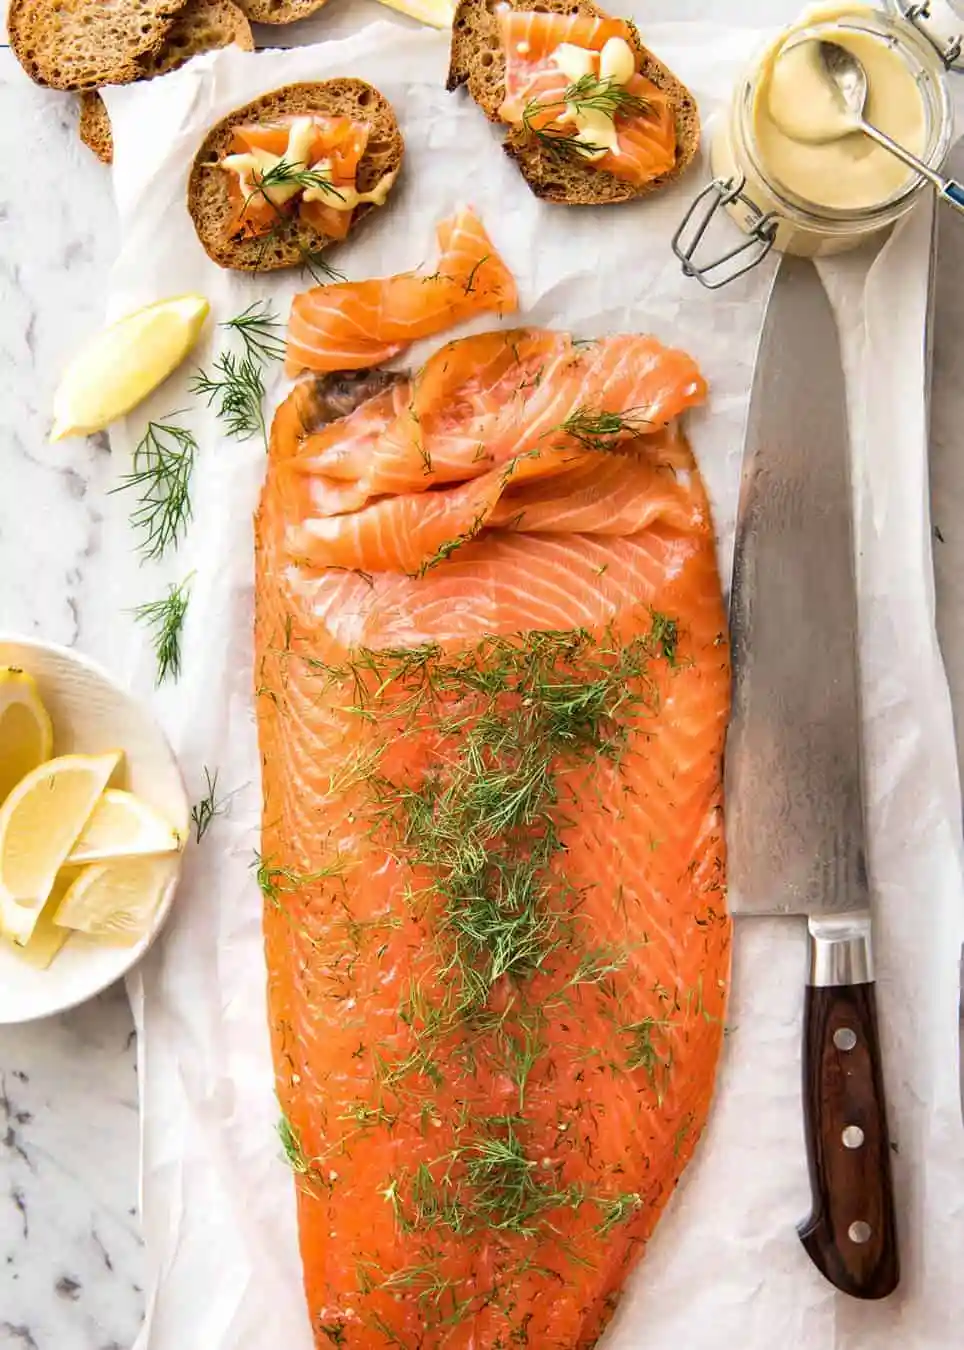 Salmon (gravadlax) served at a Swedish Christmas, on parchment paper next to a chef's knife with fresh dill and crostinis topped with raw salmon and fresh dill with a sauce.  